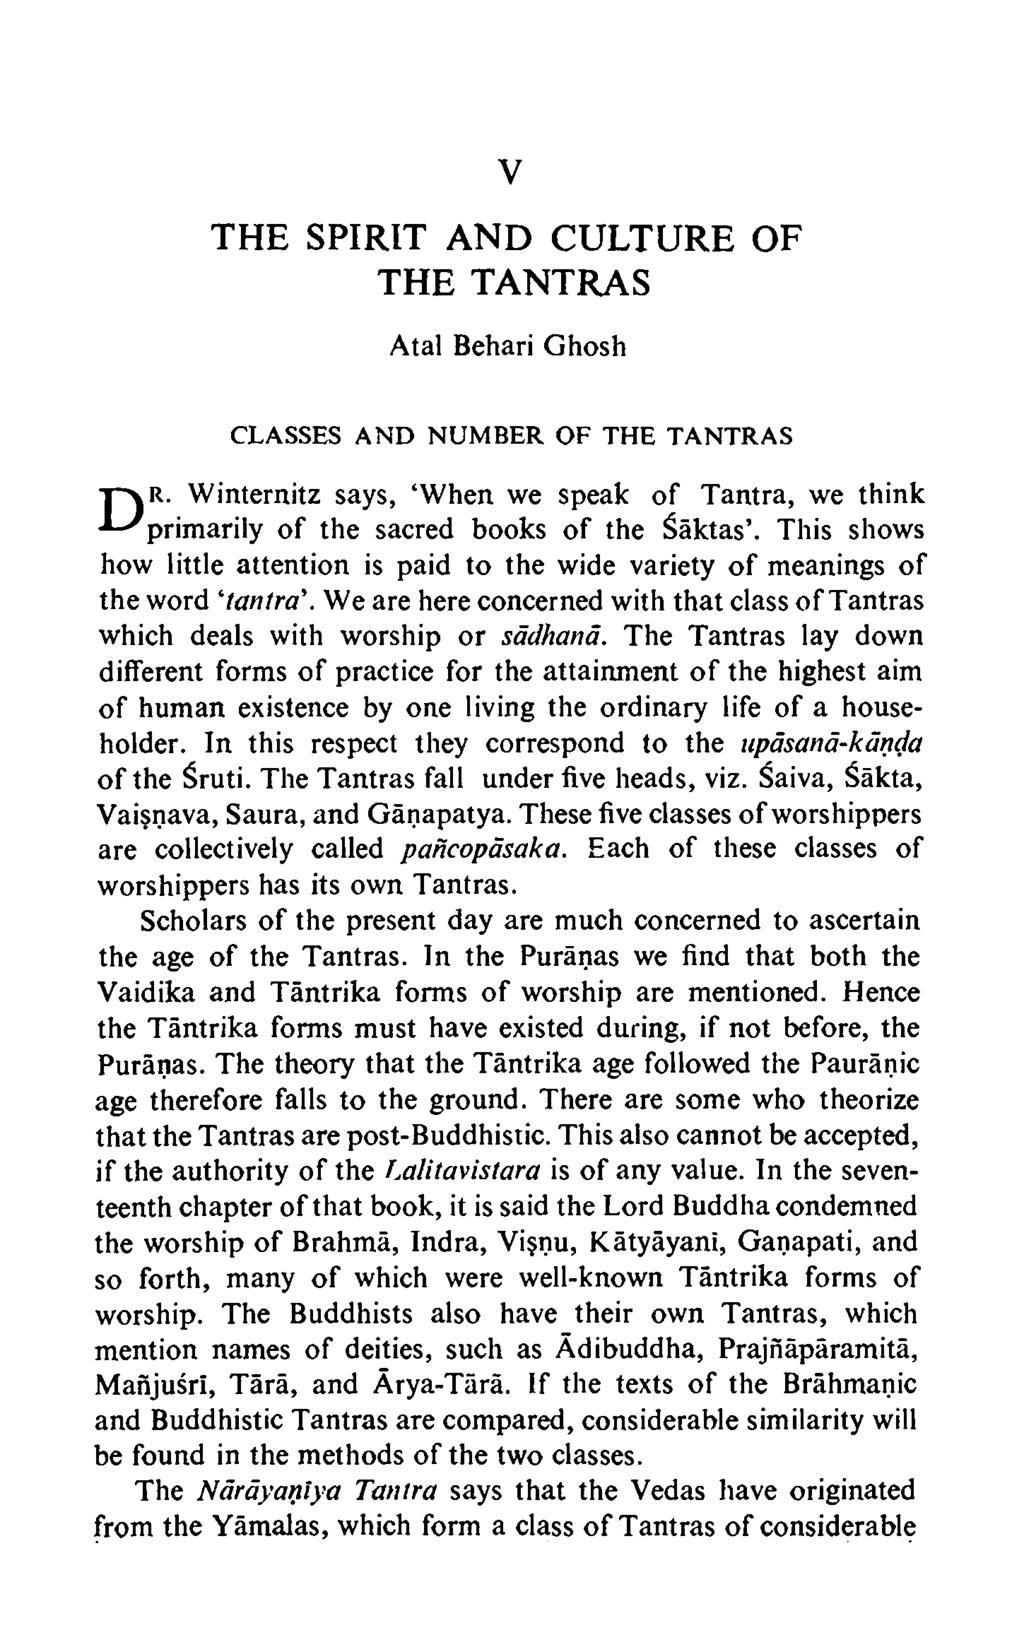 V THE SPIRIT AND CULTURE OF THE TANTRAS Atal Behari Ghosh CLASSES AND NUMBER OF THE TANTRAS pvr. Winternitz says, When we speak of Tantra, we think L-'primarily of the sacred books of the Saktas.